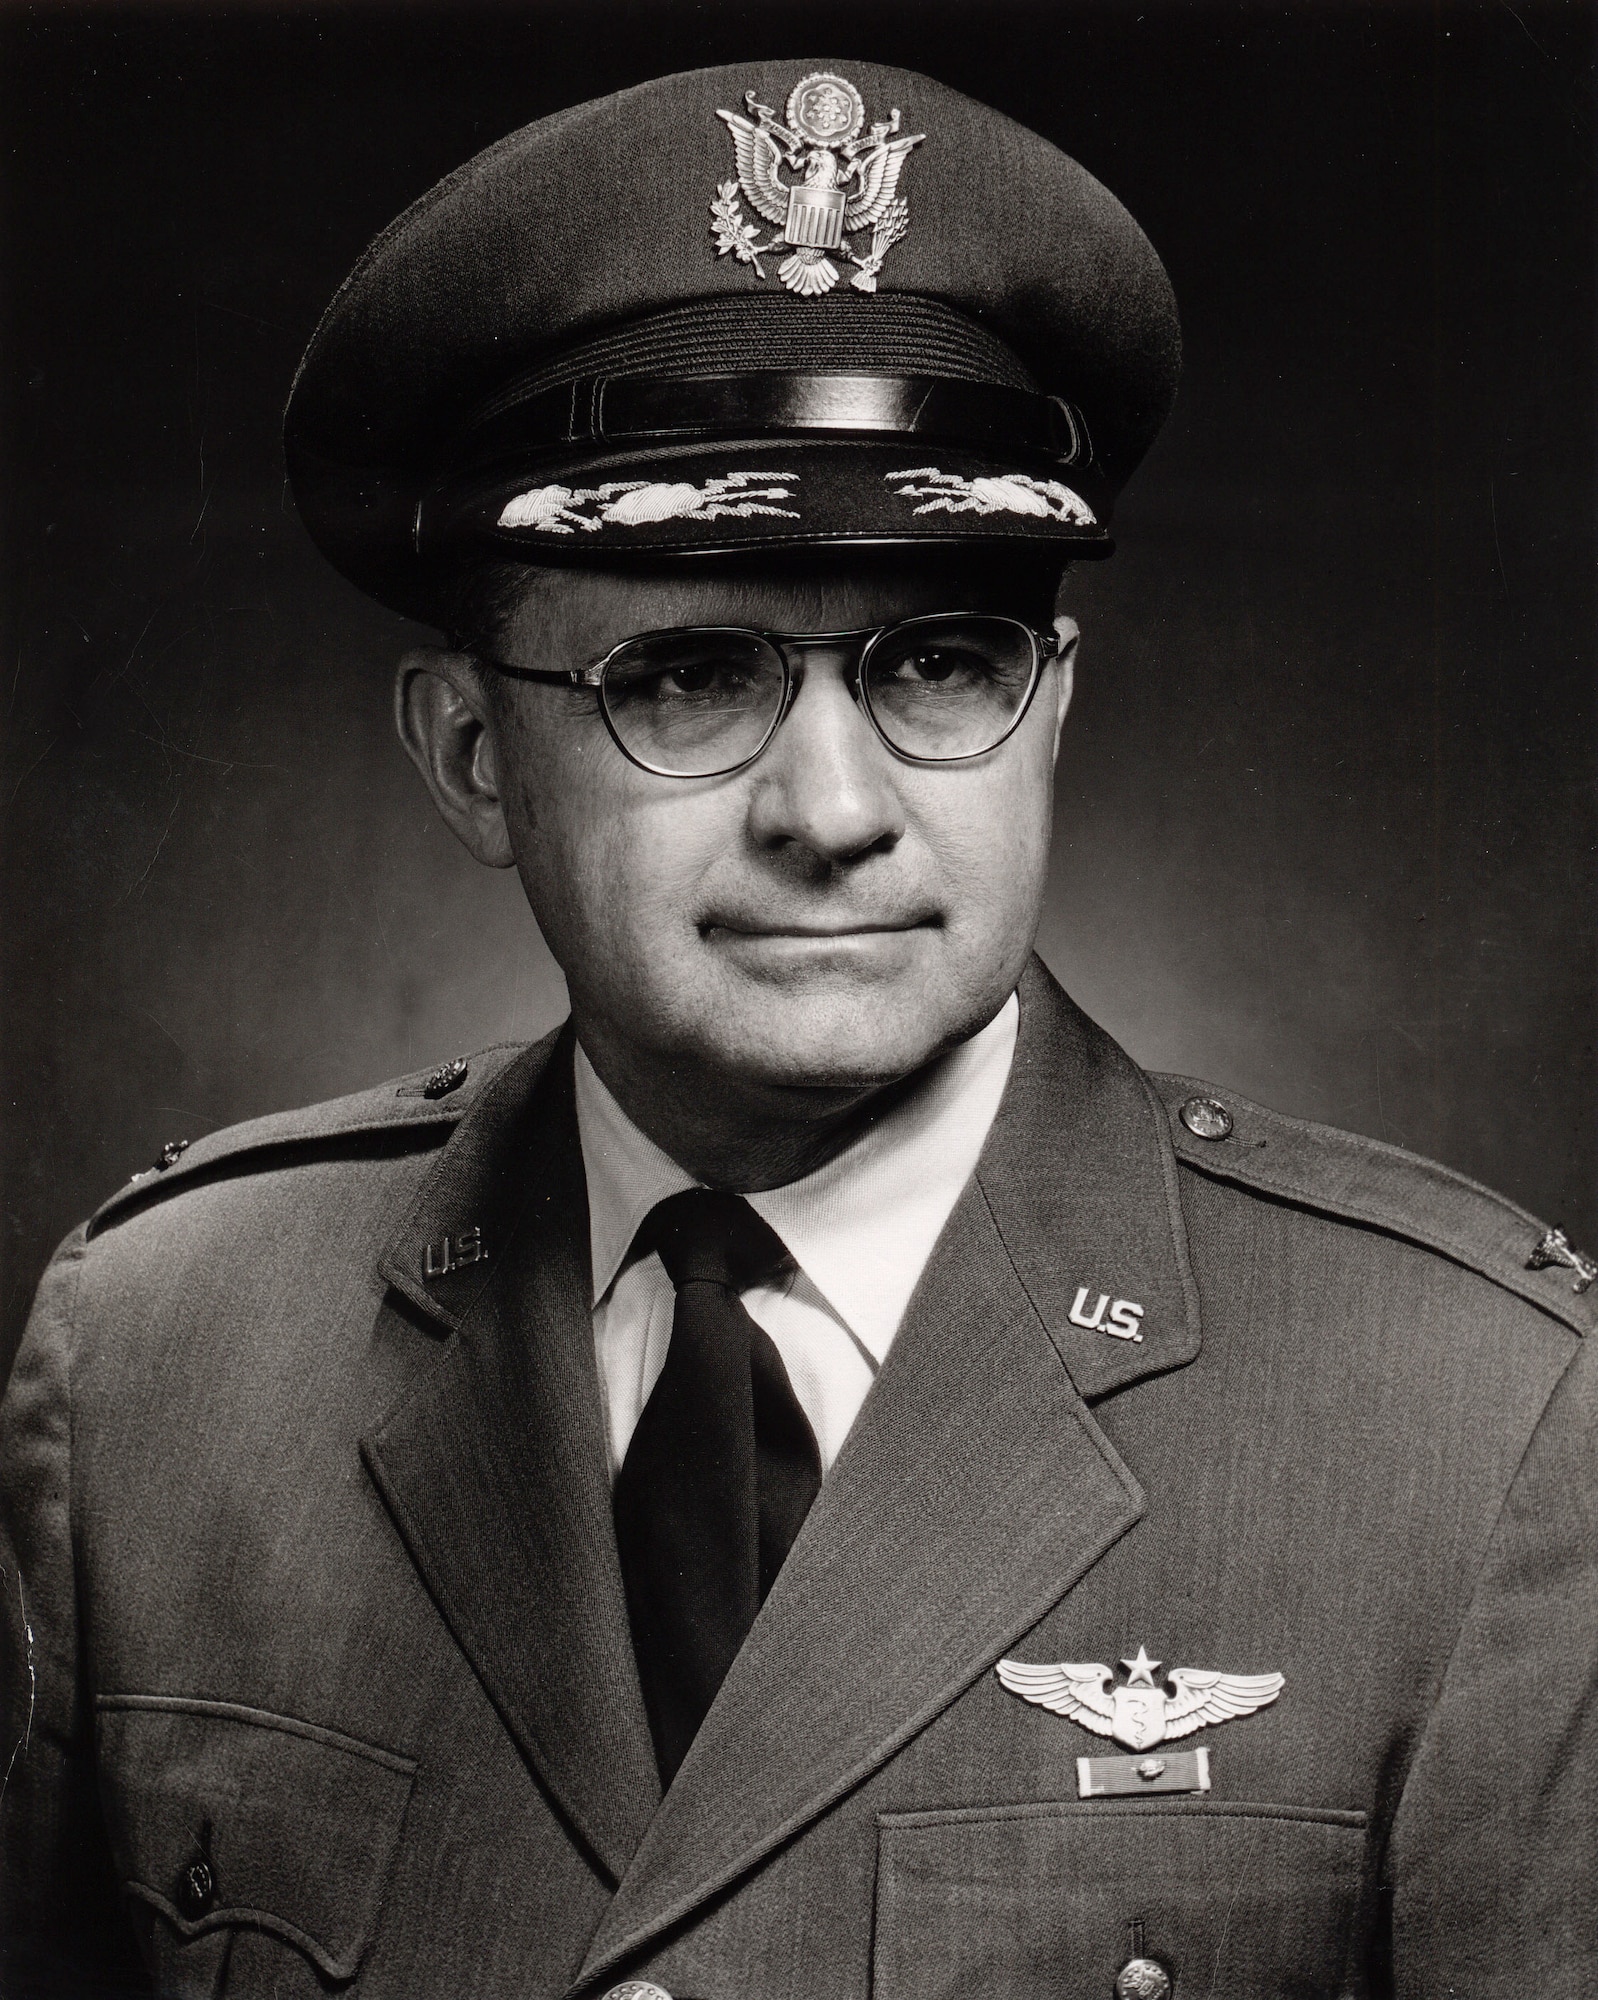 December 10, 2014 marks the 60th anniversary of Col. John P. Stapp’s record-breaking experiment at the Holloman High Speed Test Track. Stapp died at his home in Alamogordo, N.M. in 1999, but his findings continue to help the team at the test track perform and continue to be the world’s best rocket sled test team. (Courtesy Photo)